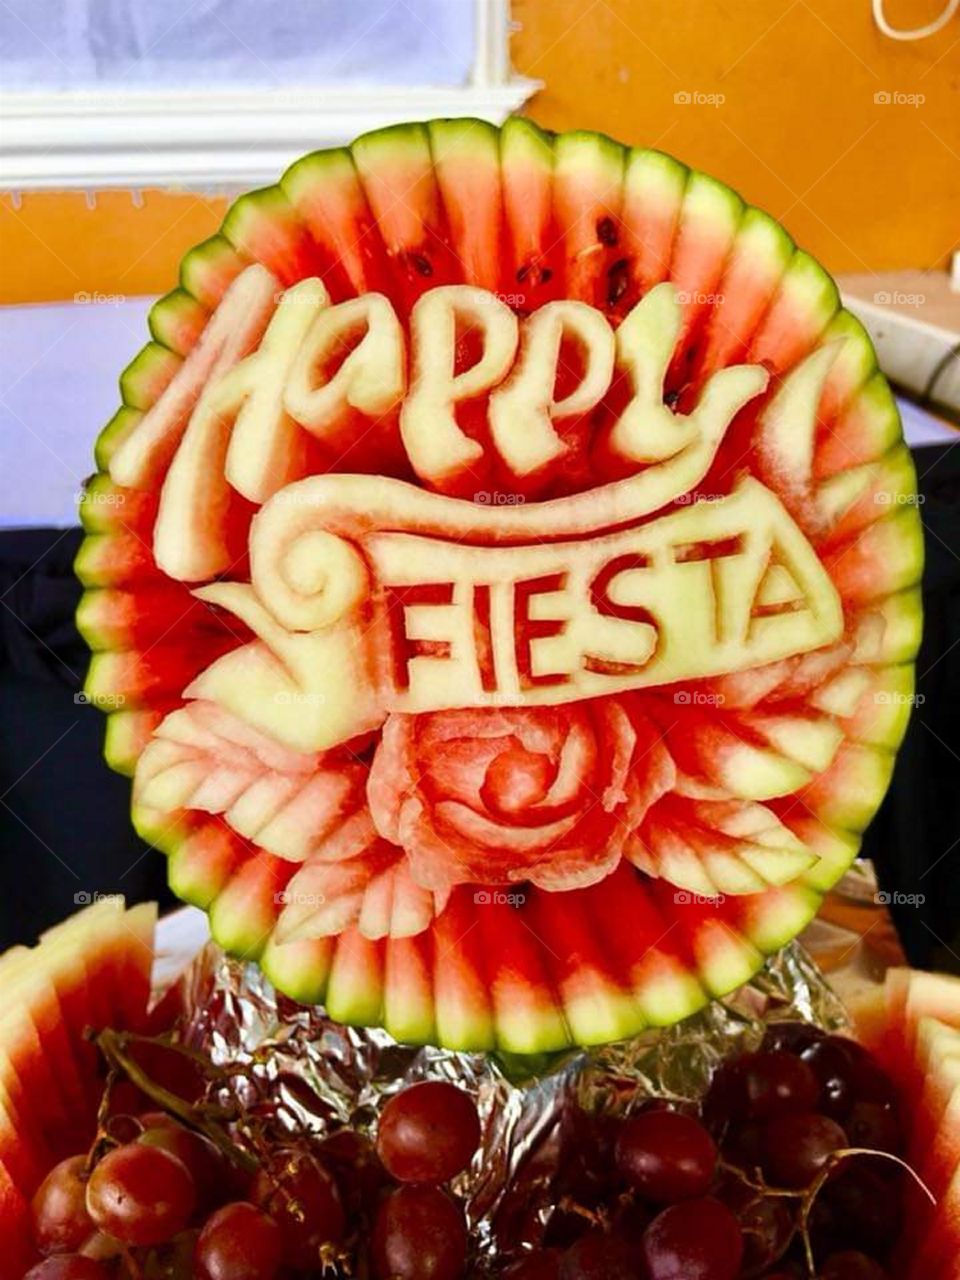 Happy Fiesta Greeting on Carved Fruit